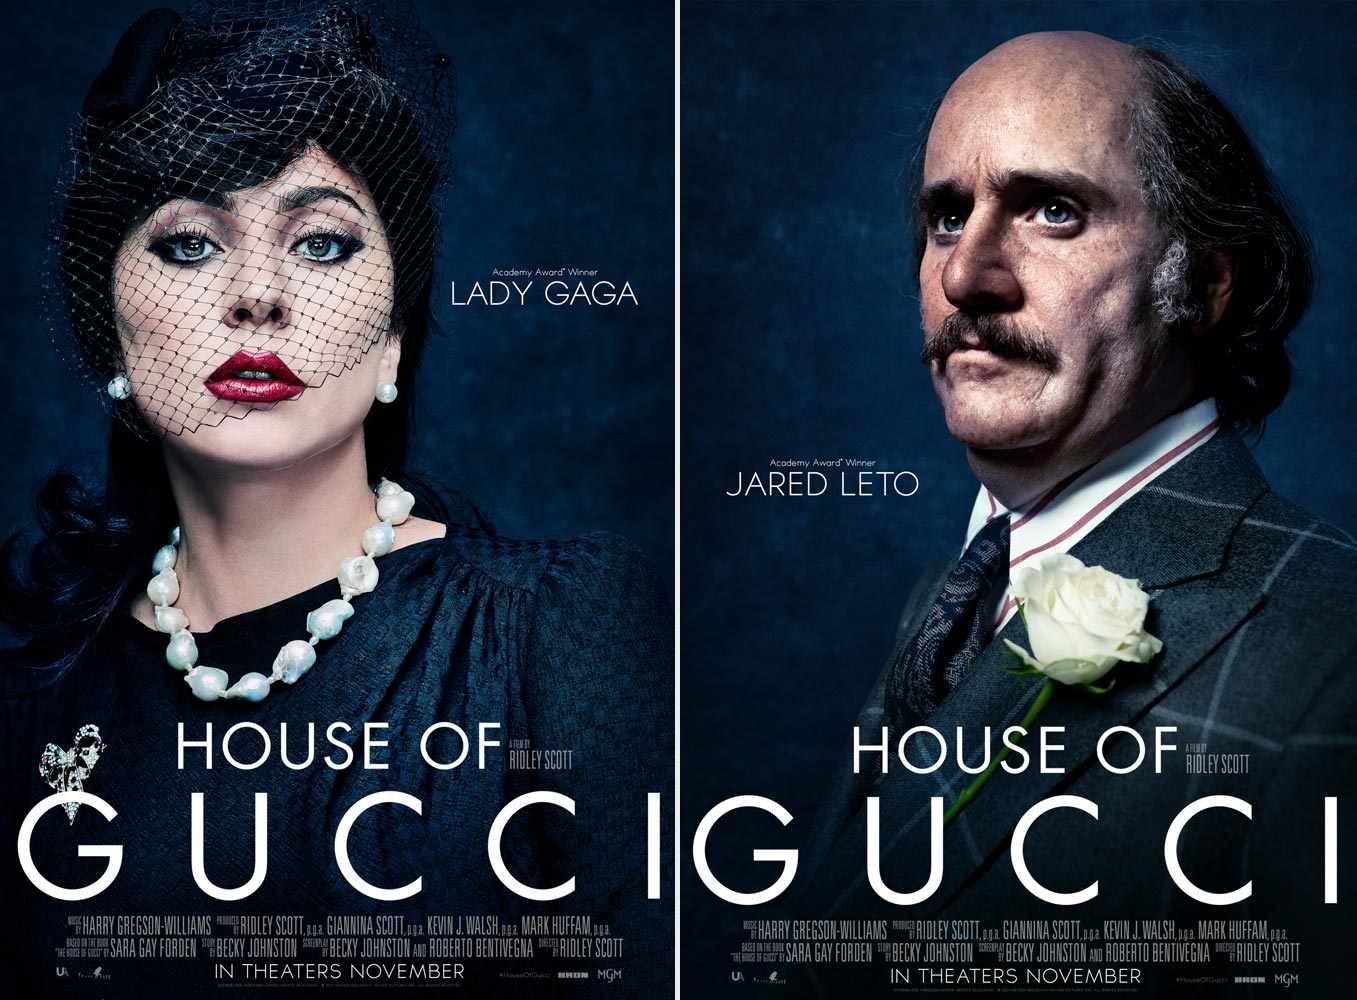 House of Gucci Posters: See Lady Gaga and an Unrecognizable Leto | PEOPLE.com